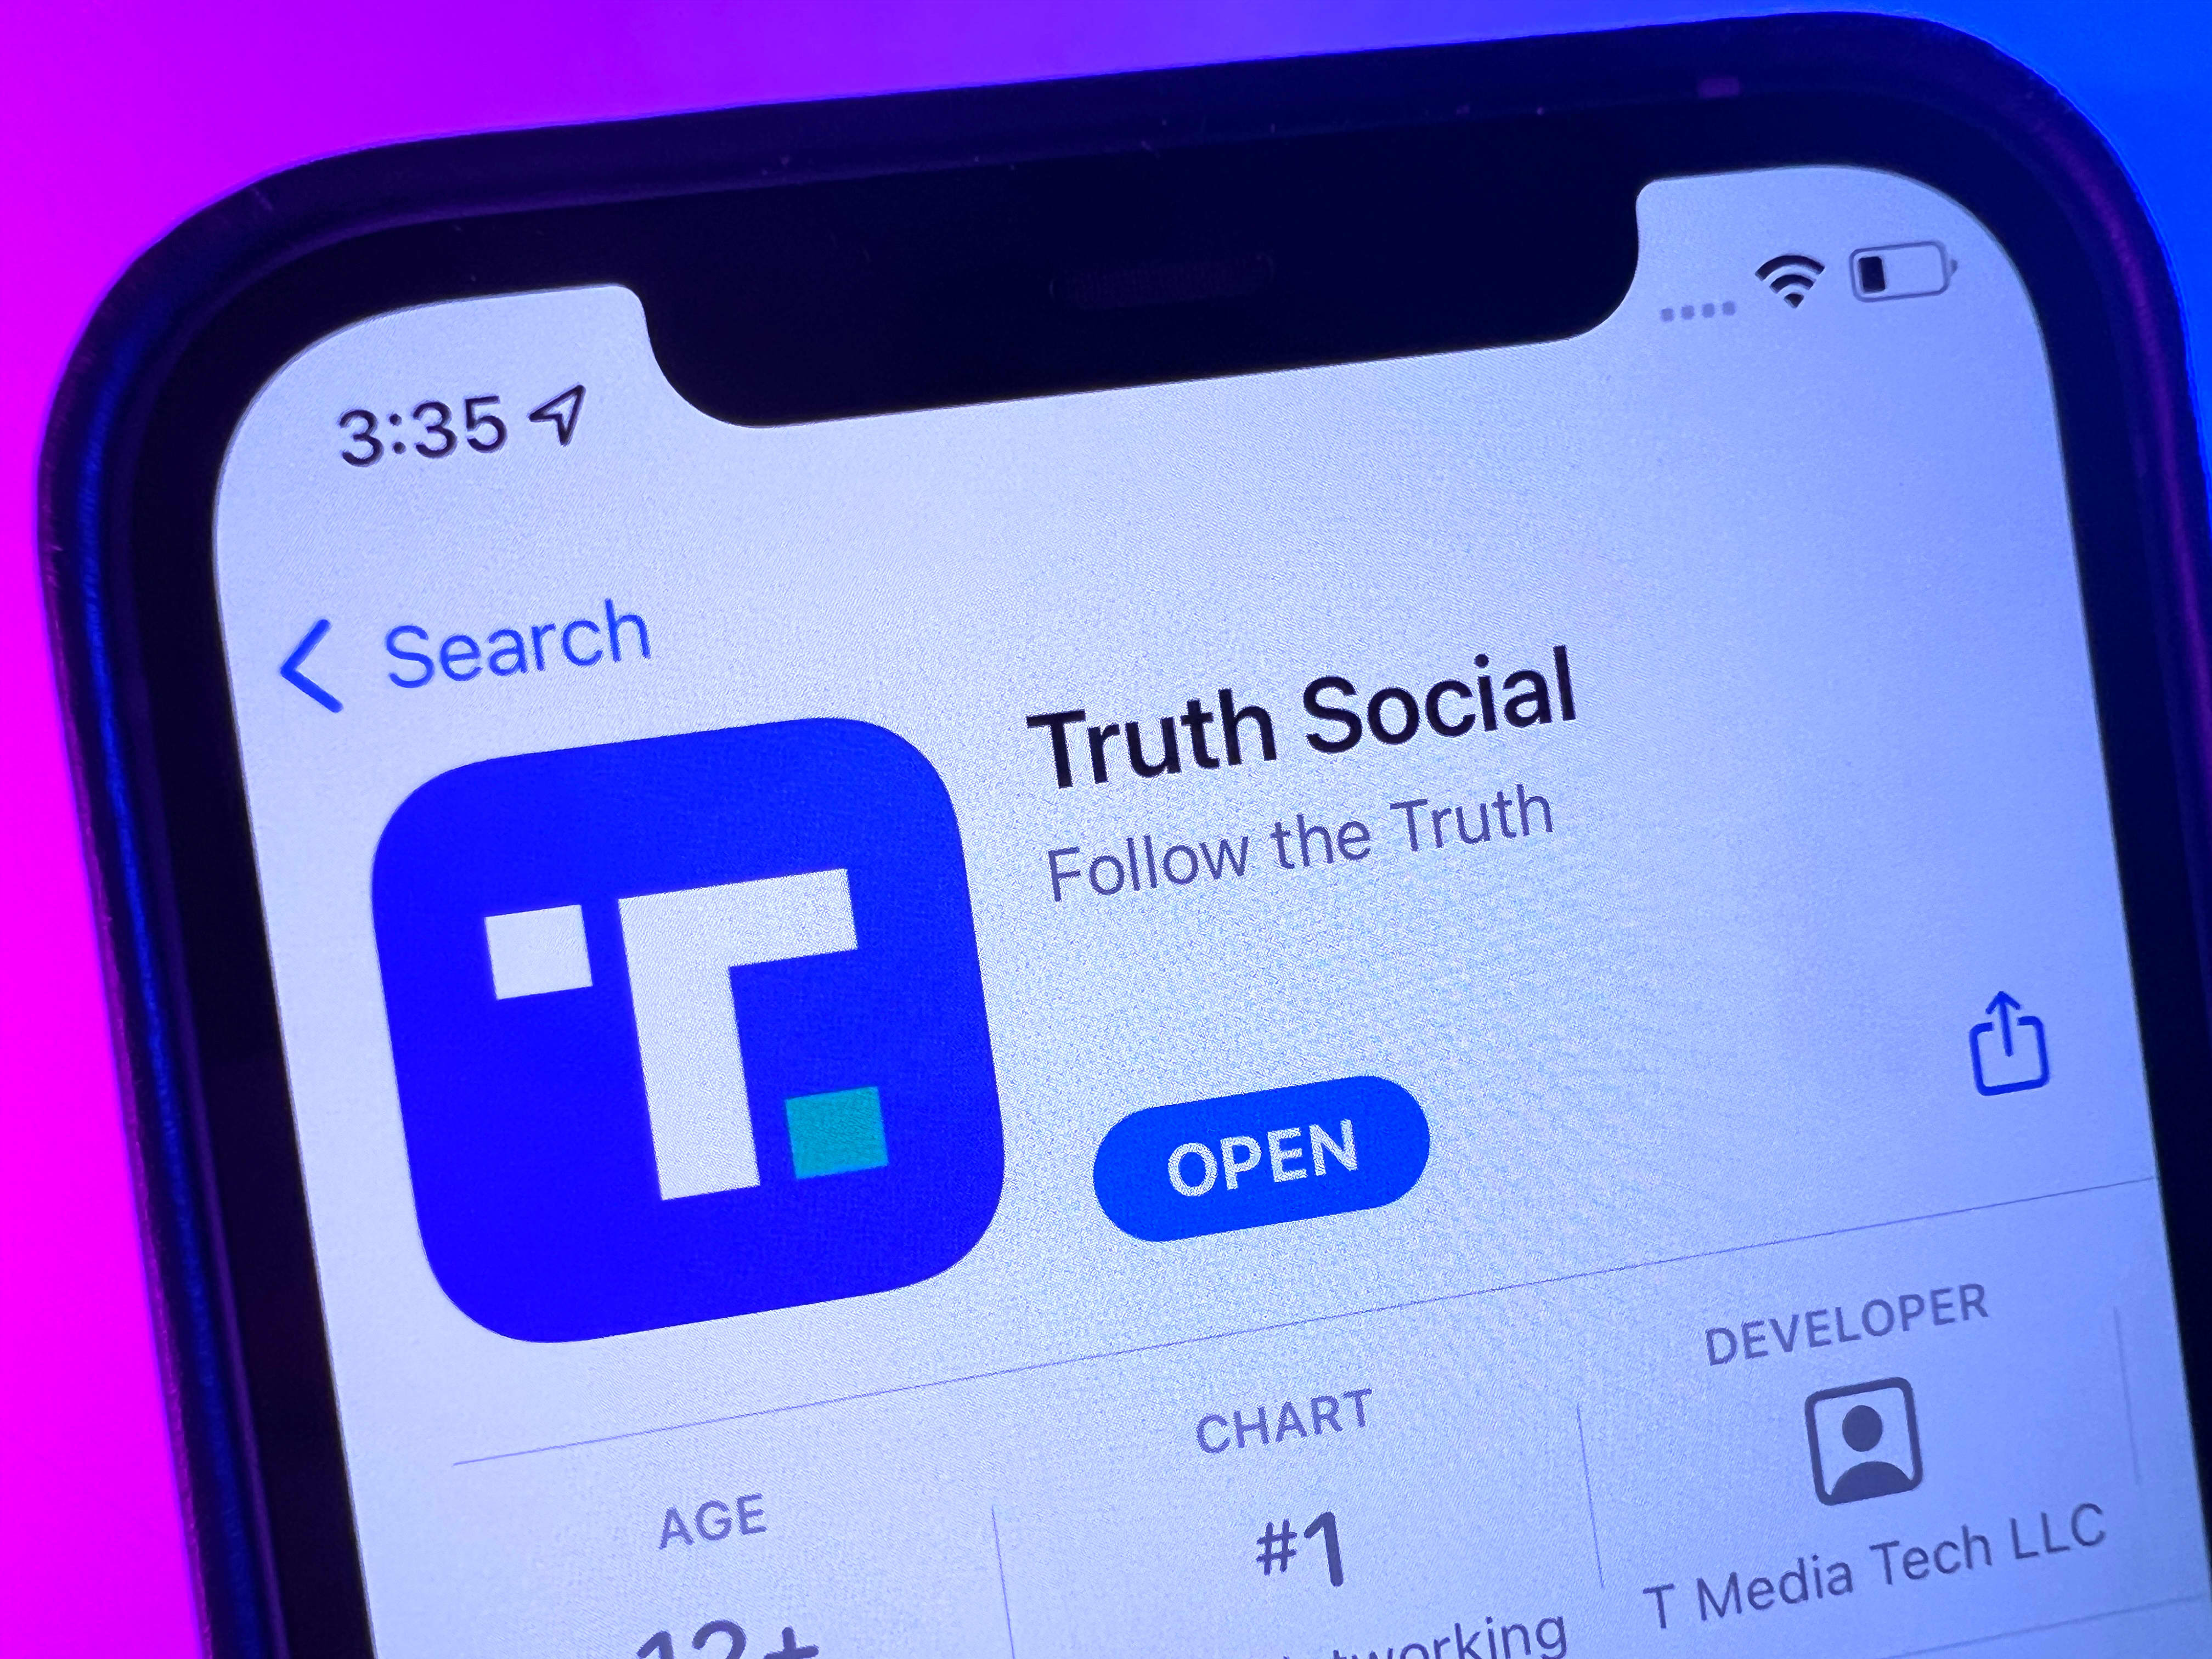 Trump-backed Truth Social tops Apple's app store charts